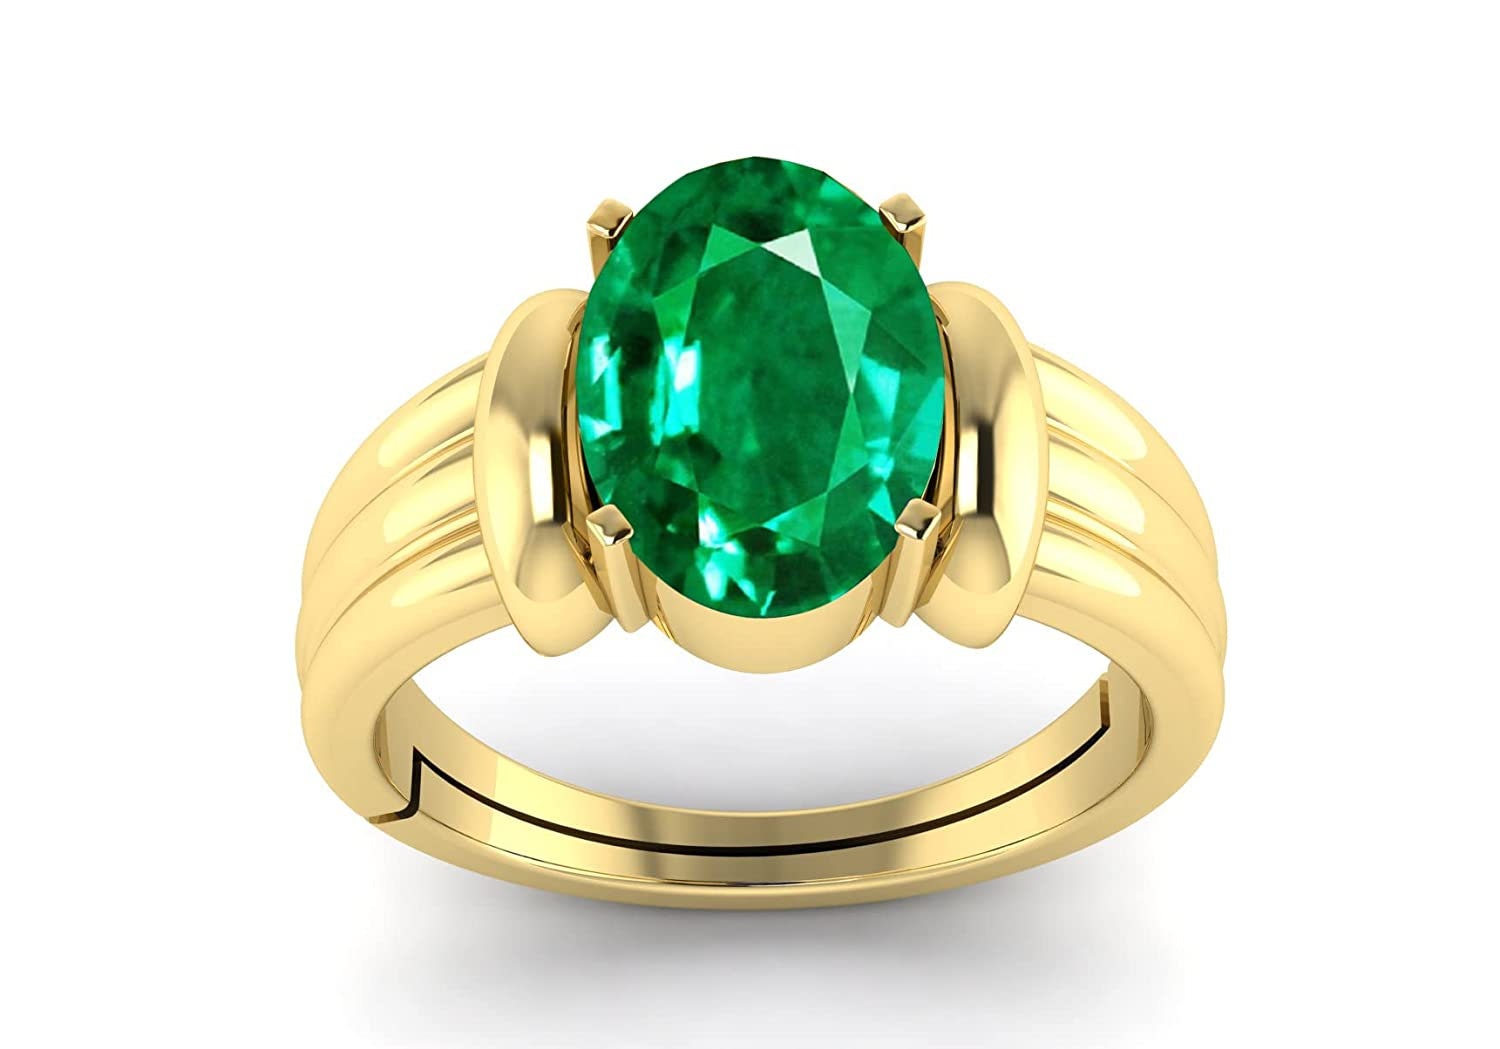 Buy Chopra Gems & Jewellery Gold Plated Brass Ratti 6.50 Emerald Panna  Stone Ring (Men and Women) - Adjustable Online at Best Prices in India -  JioMart.